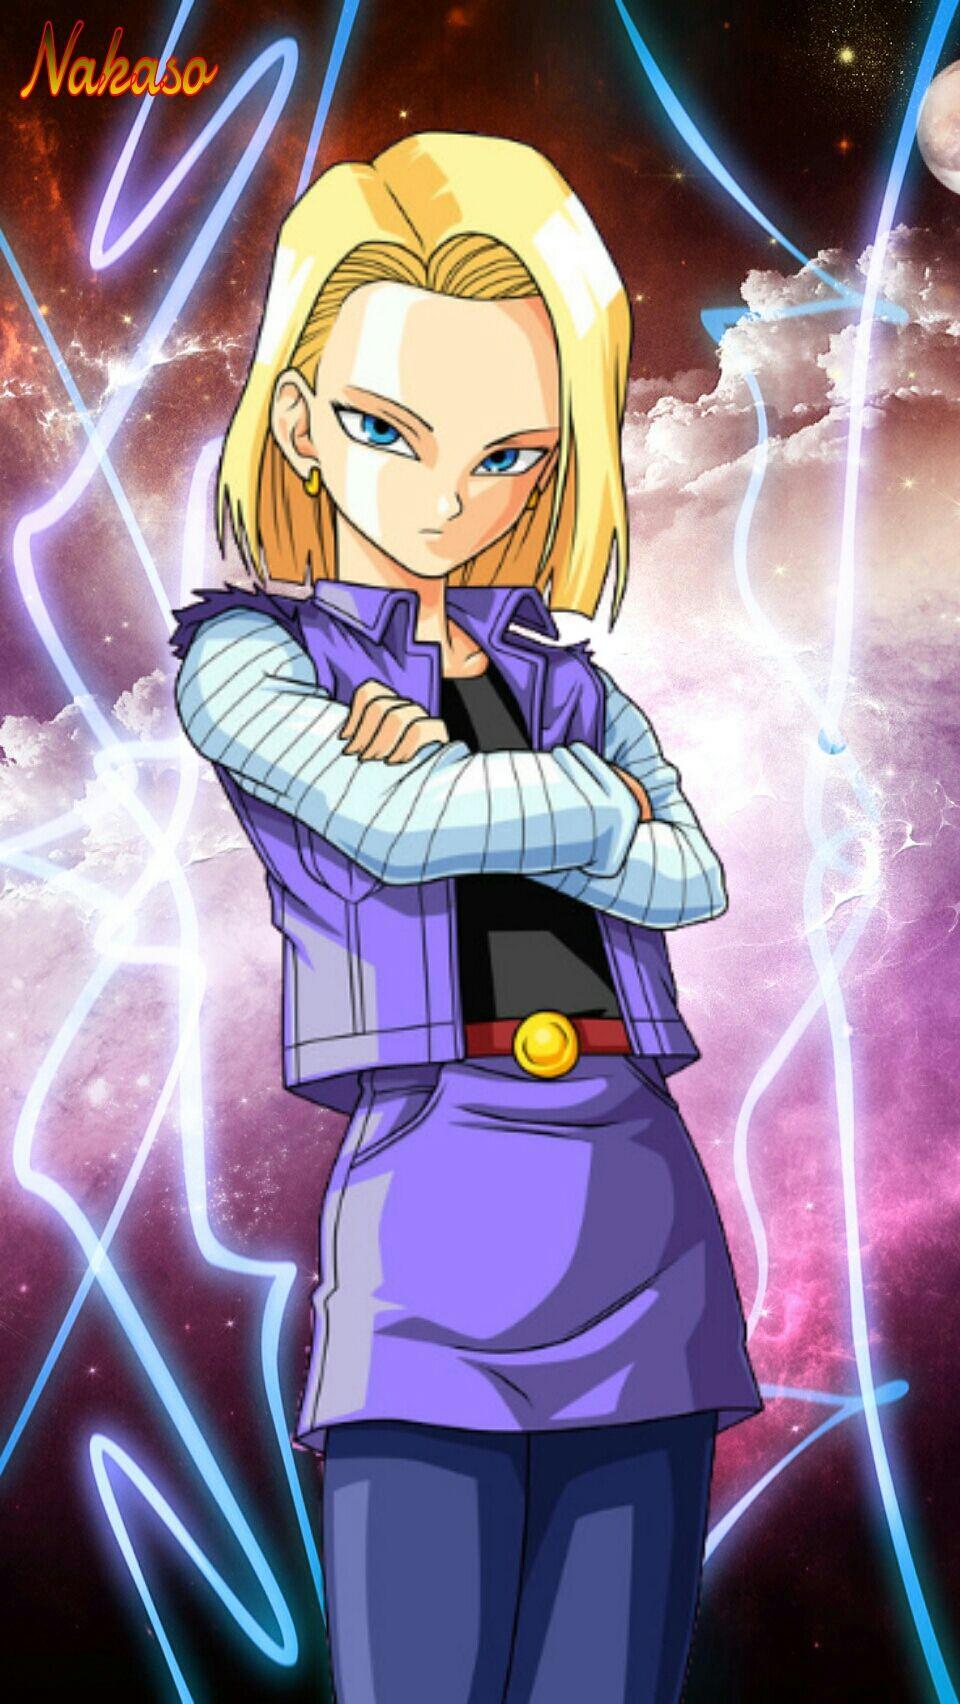 DBZ Android 18 Wallpaper